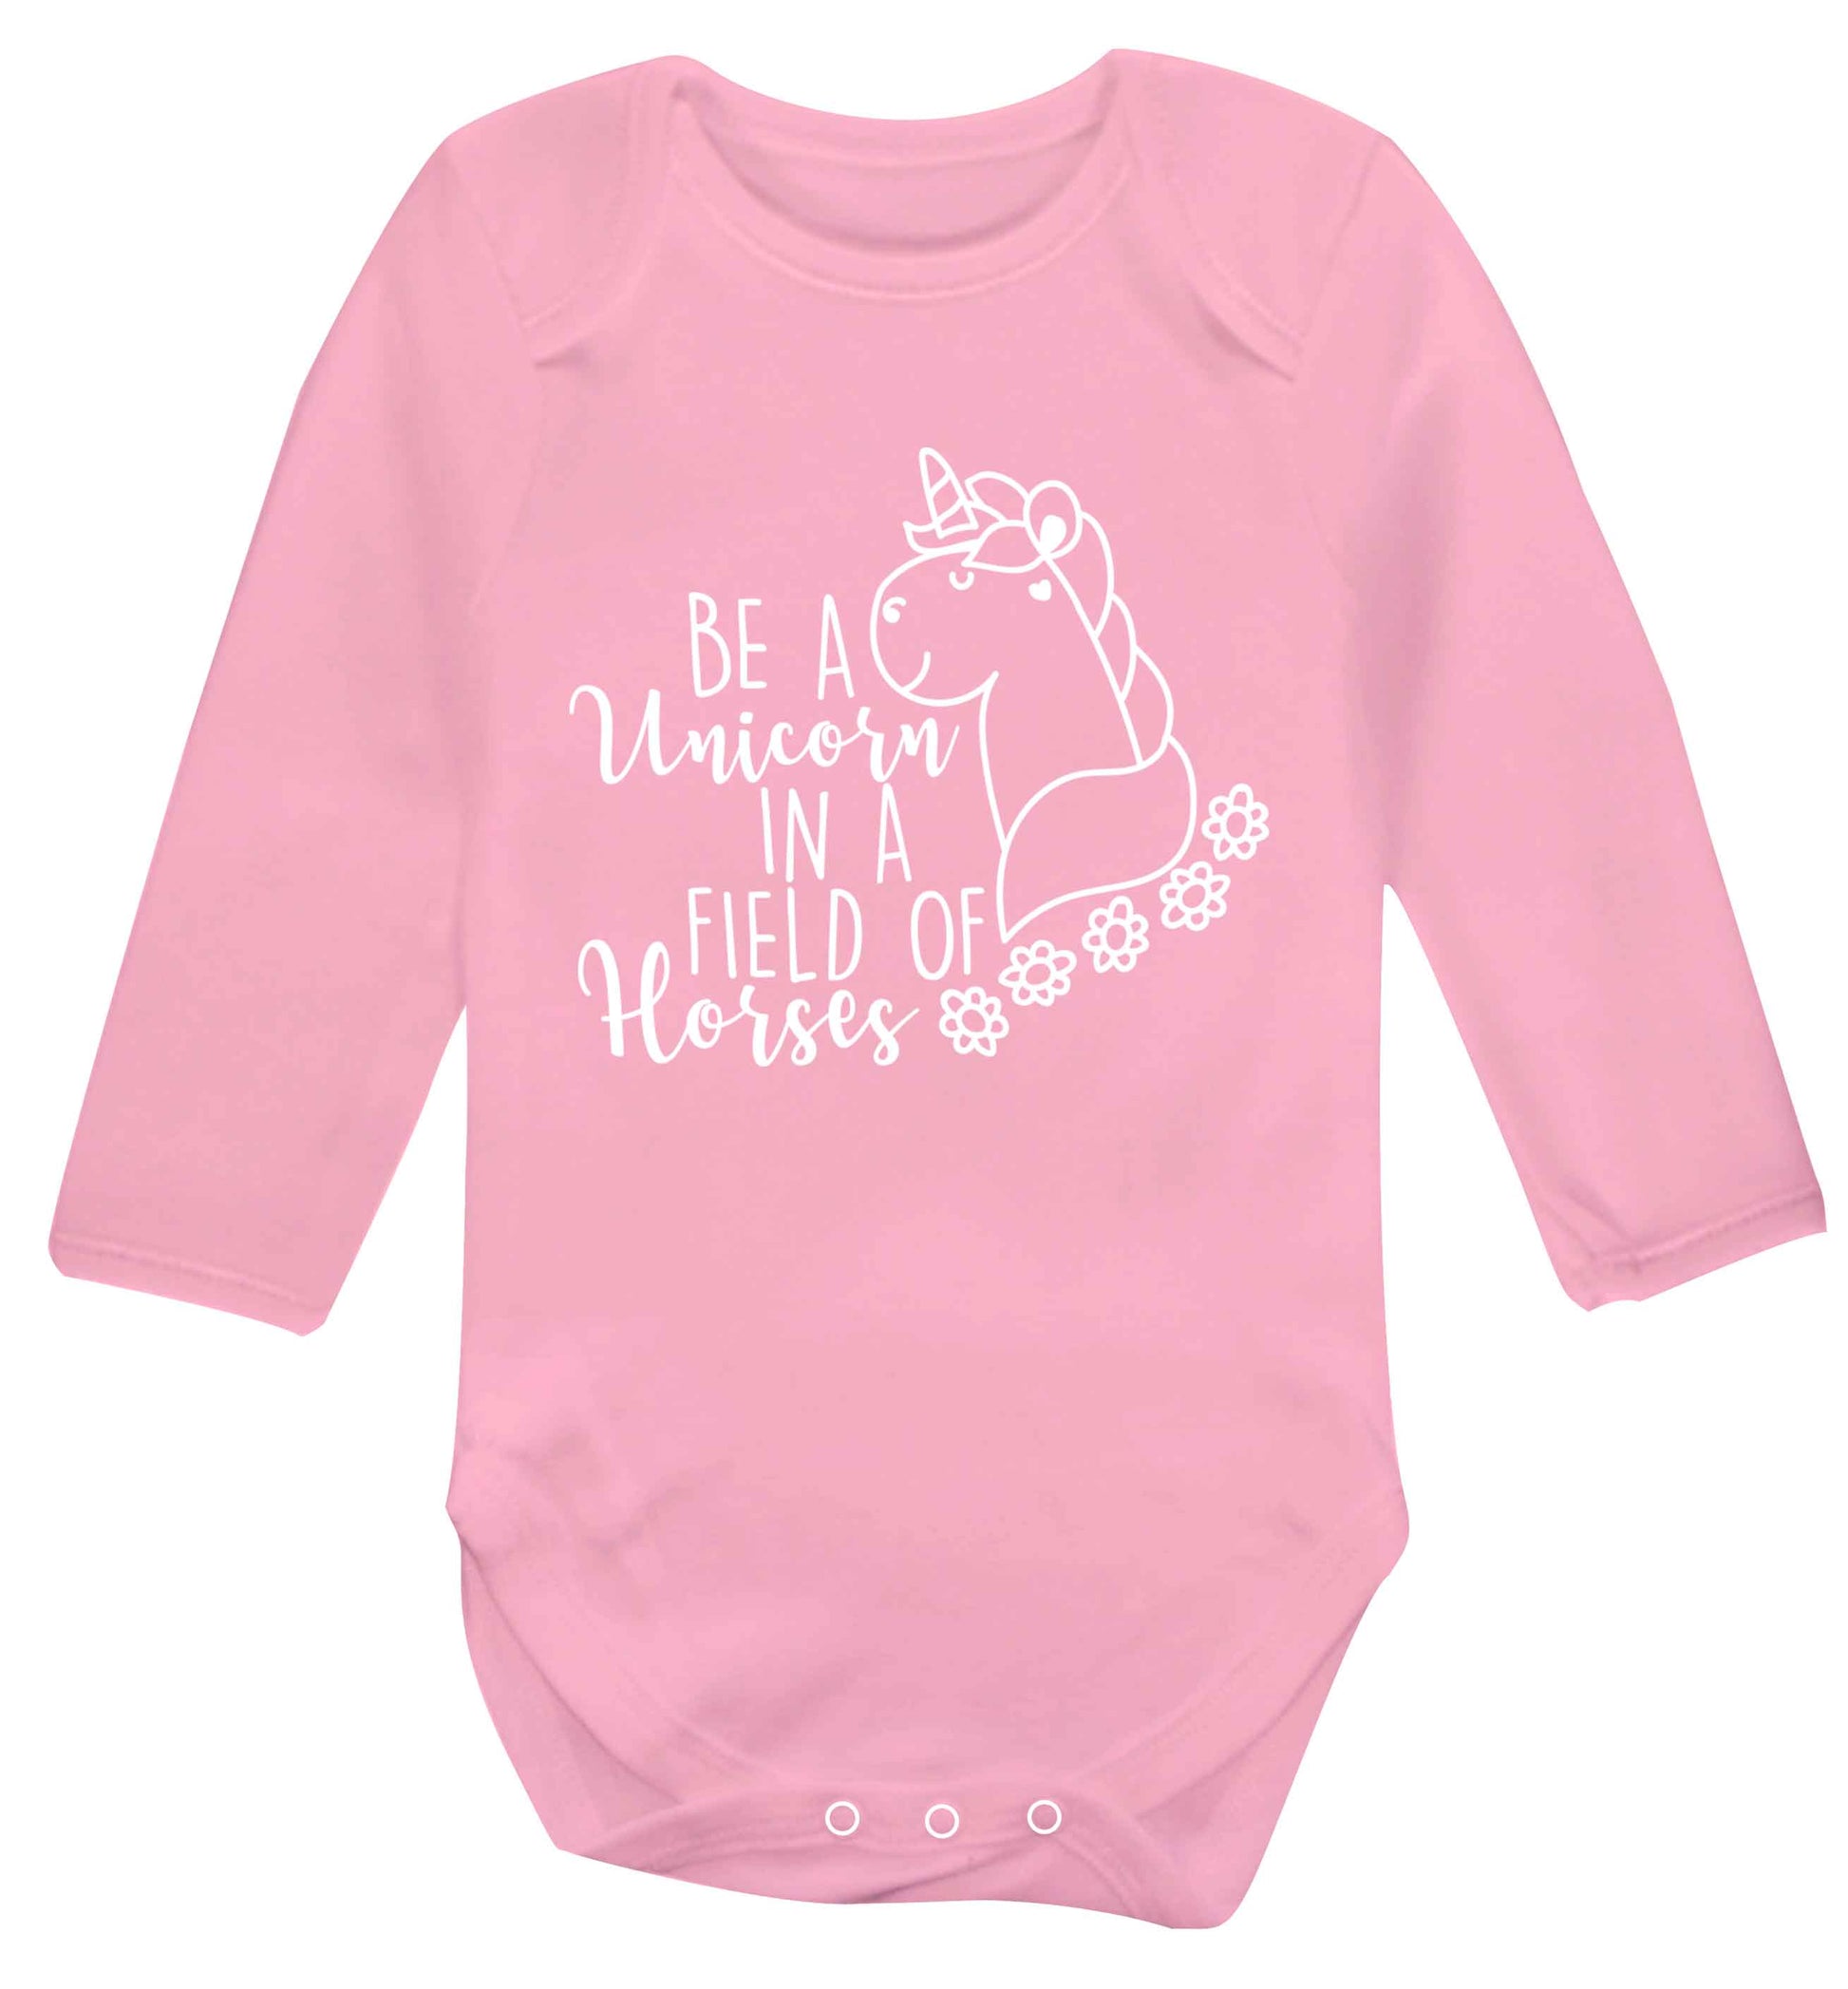 Be a unicorn in a field of horses Baby Vest long sleeved pale pink 6-12 months